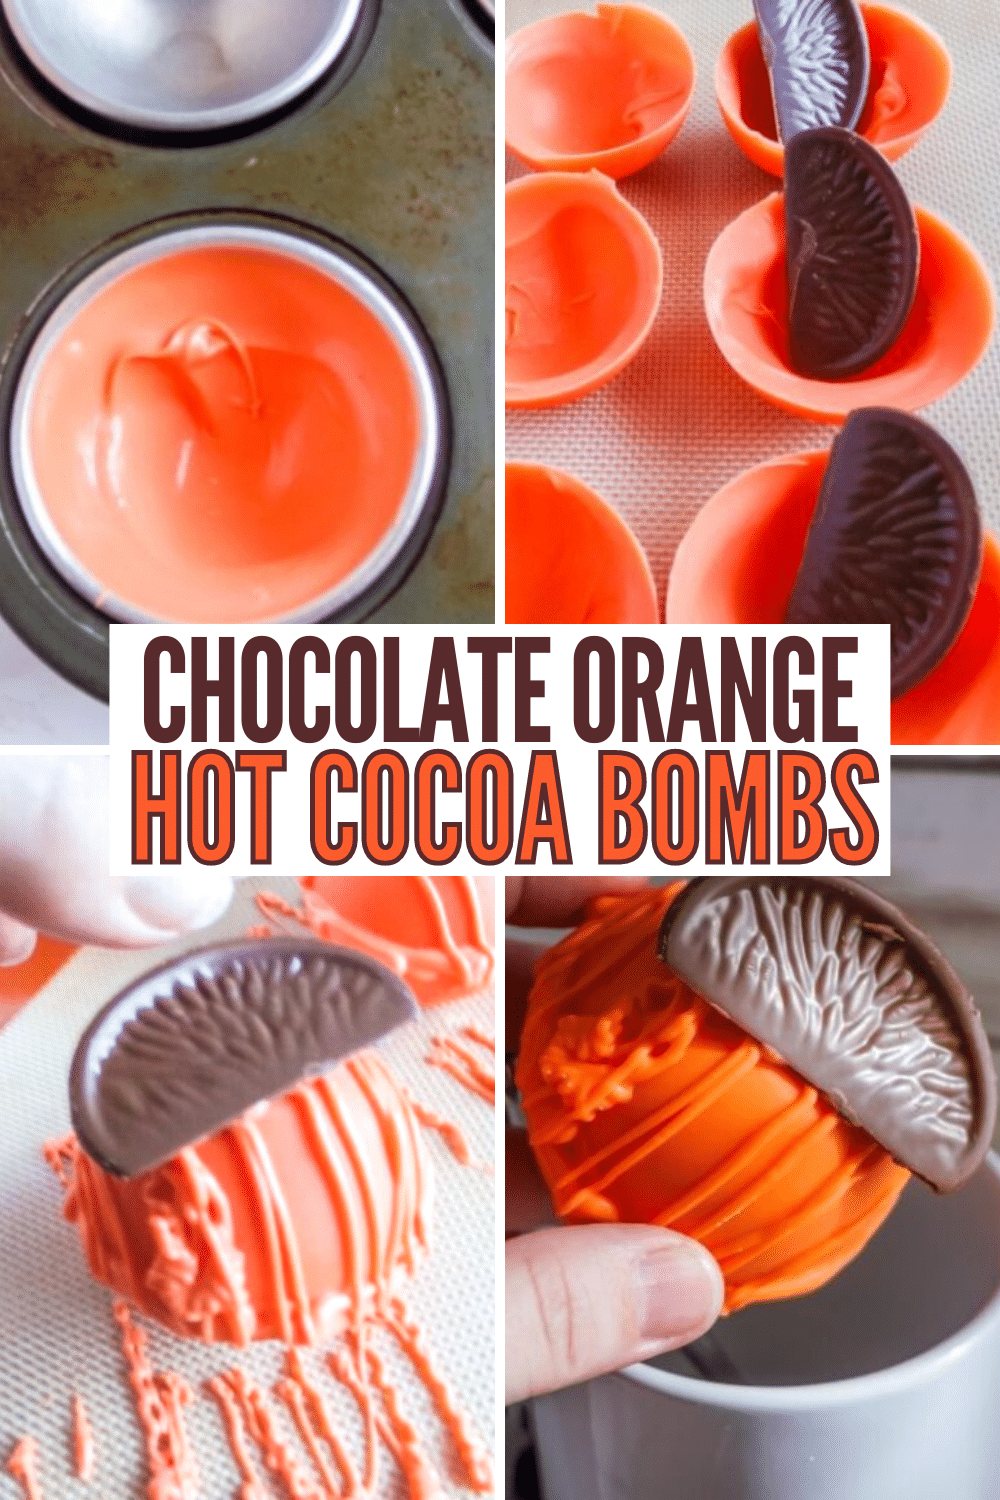 These Chocolate Orange Hot Cocoa Bombs are how the holidays are supposed to taste! Sweet and full of flavor! #hotcocoabombs #hotcocoa #chocolateorange #holidays via @wondermomwannab